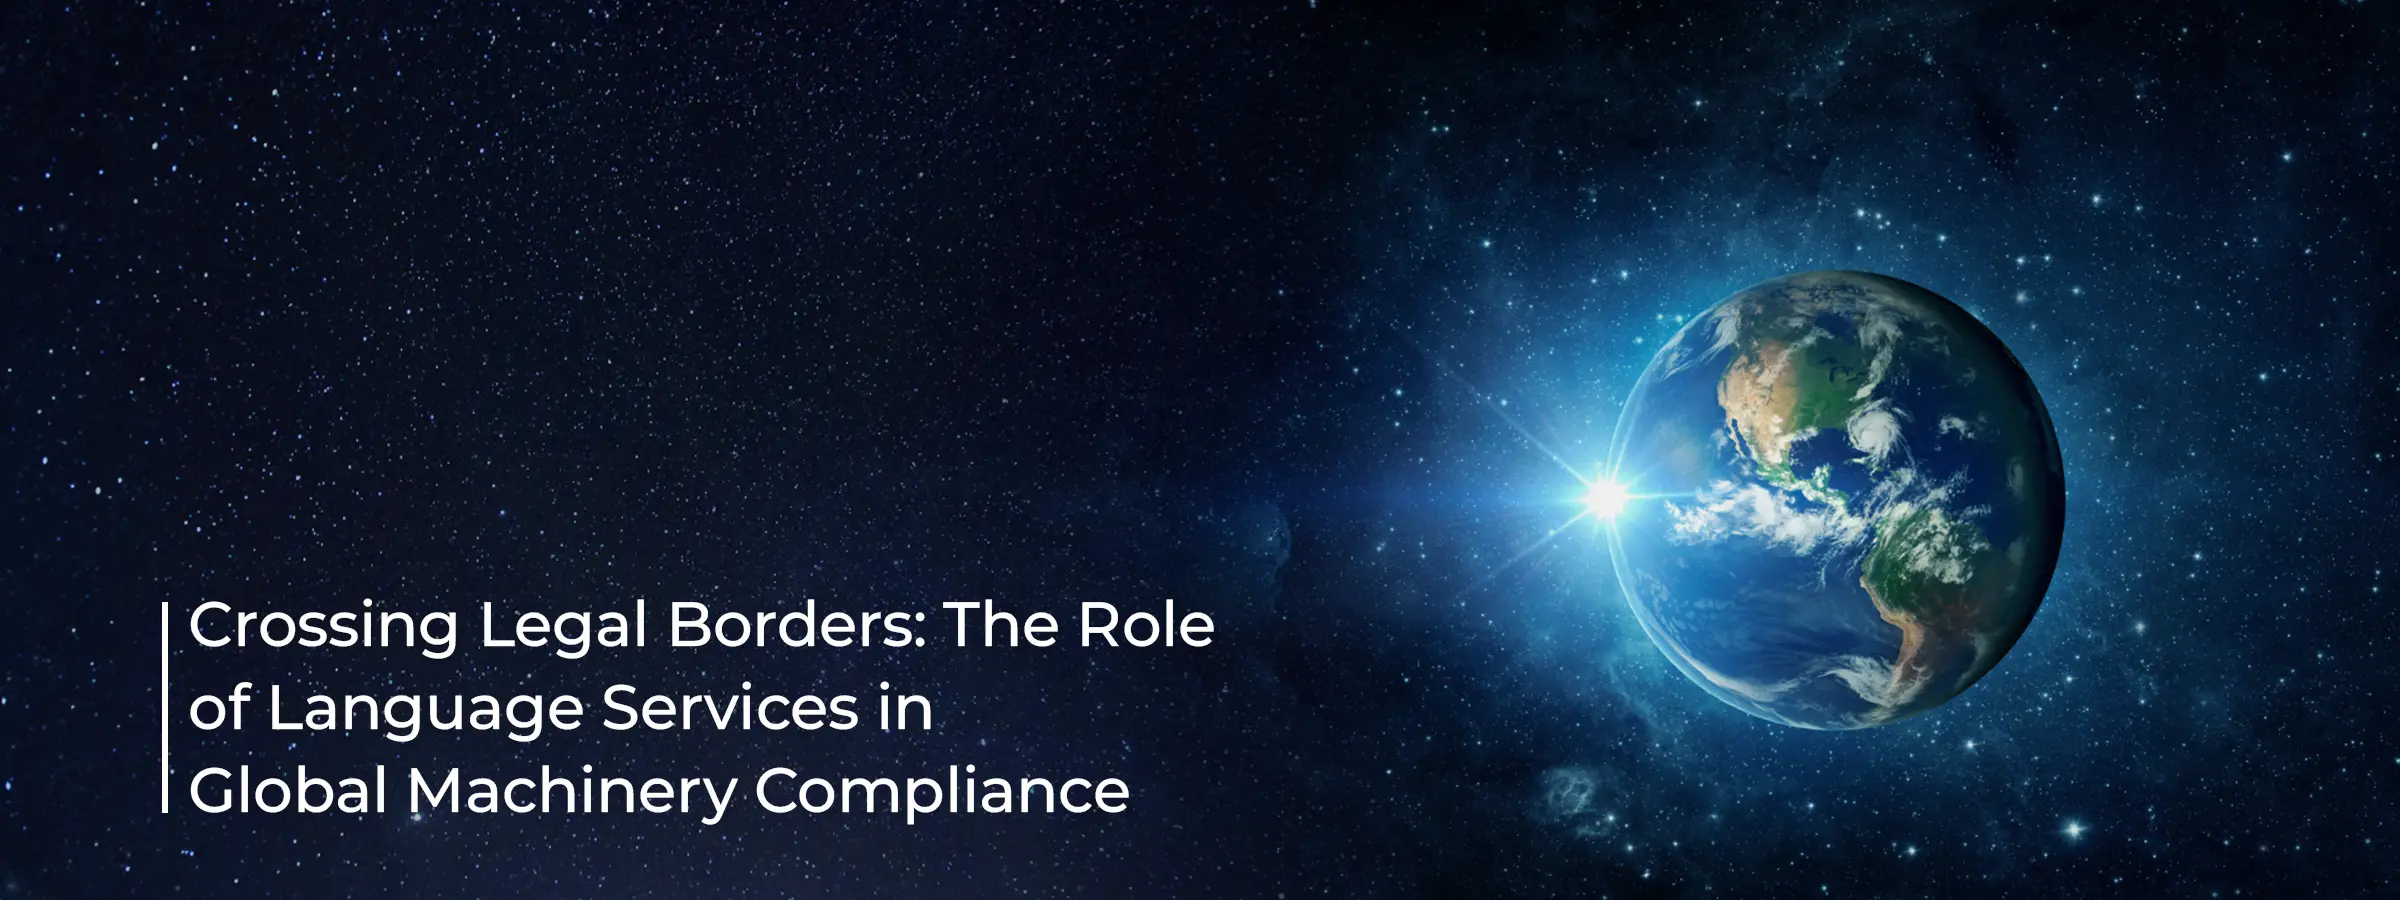 crossing-legal-borders-the-role-of-language-services-in-global-machinery-compliance